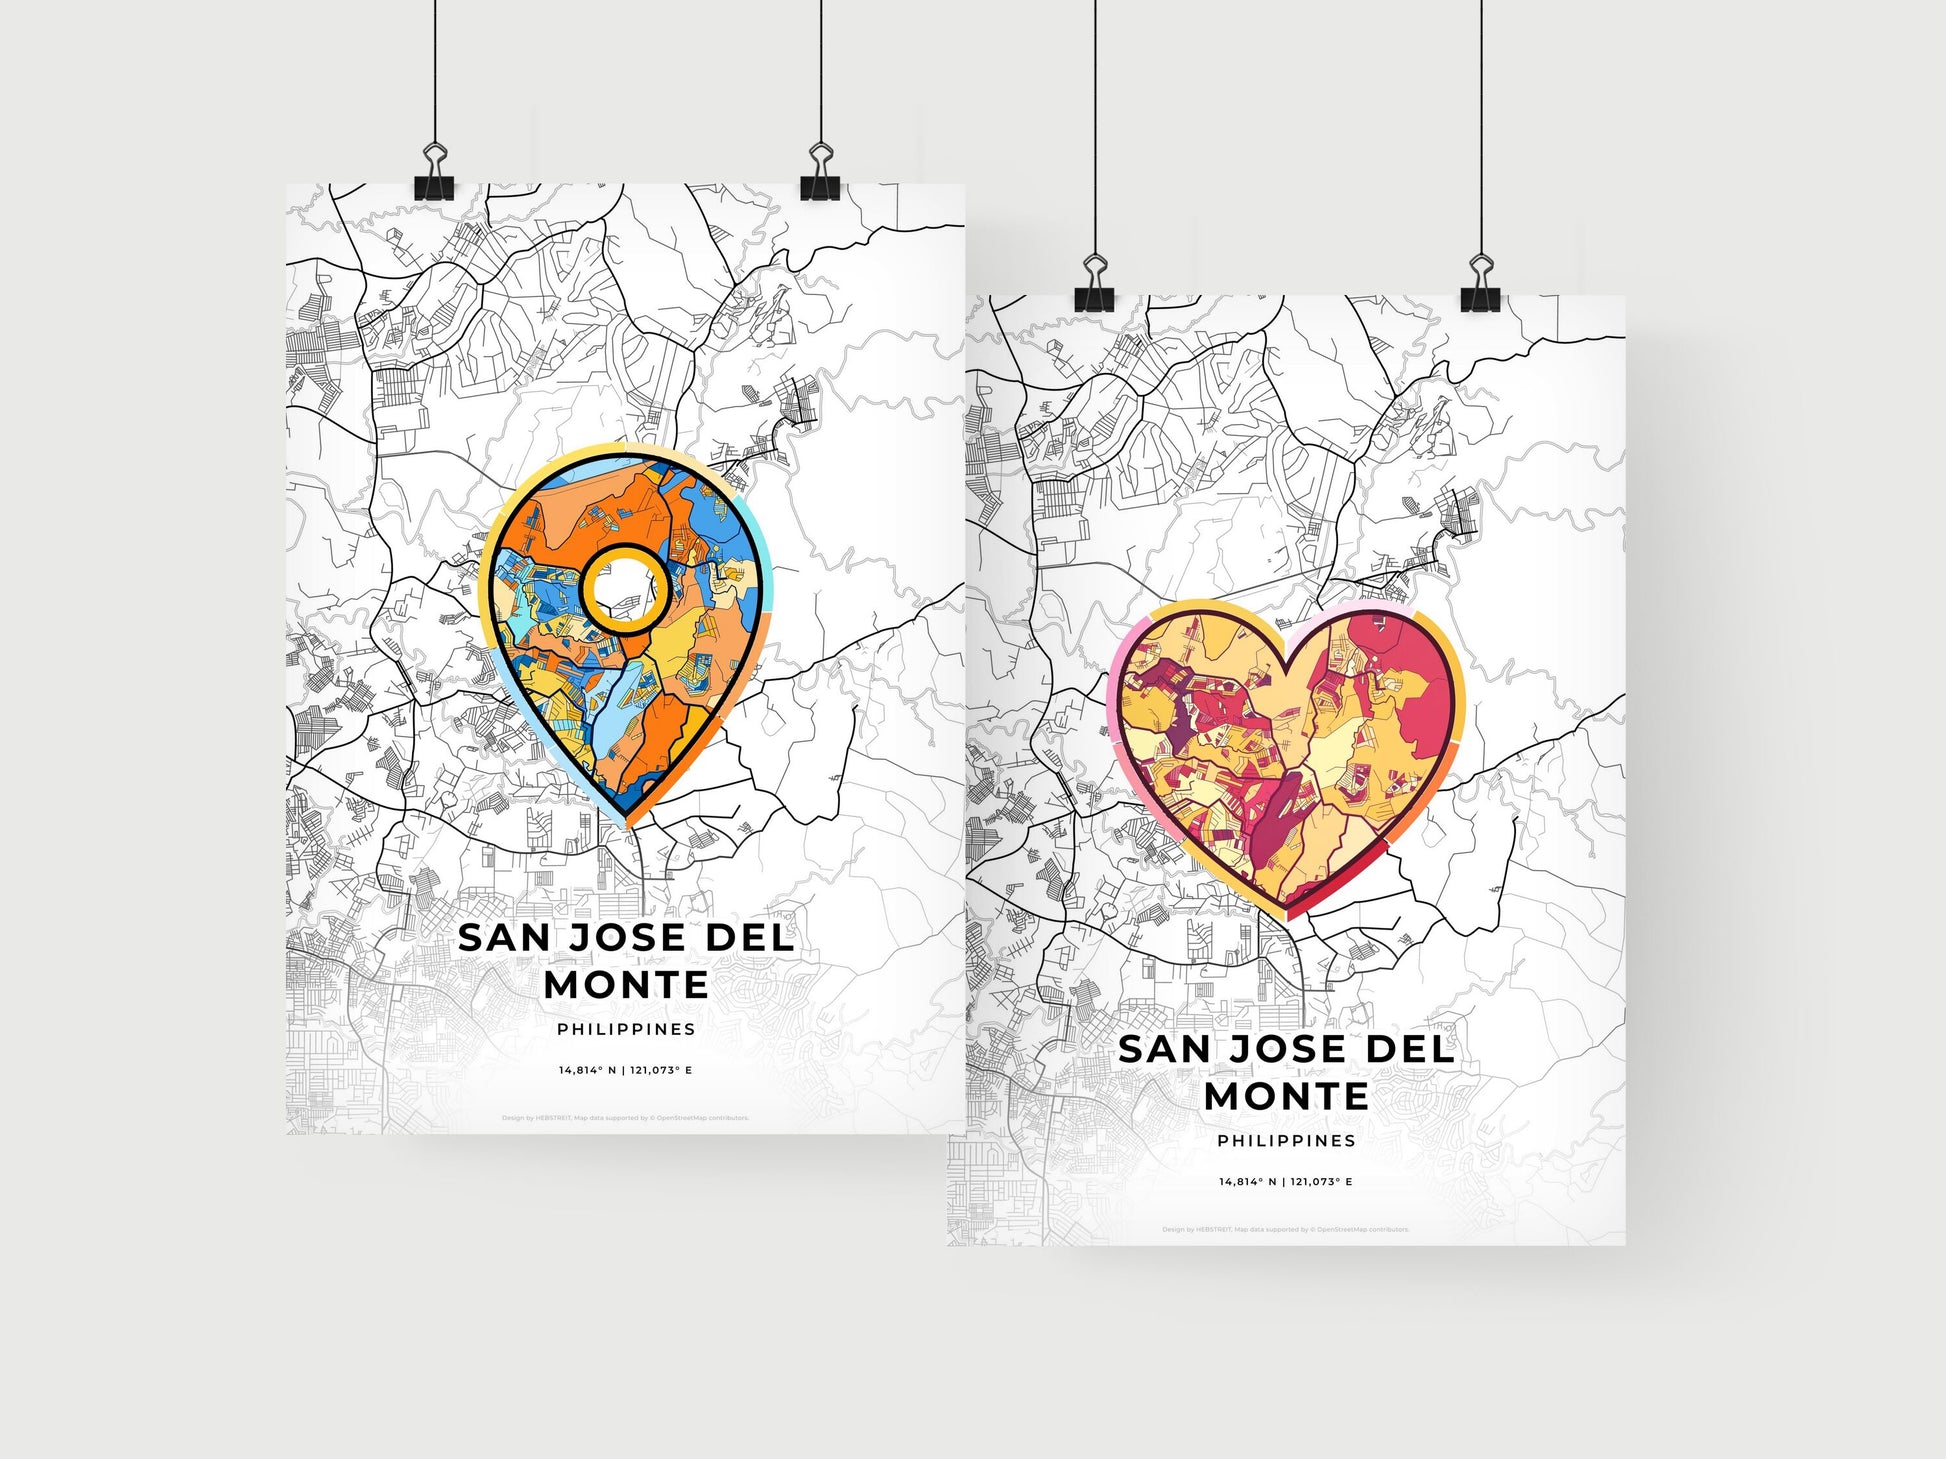 SAN JOSE DEL MONTE PHILIPPINES minimal art map with a colorful icon.